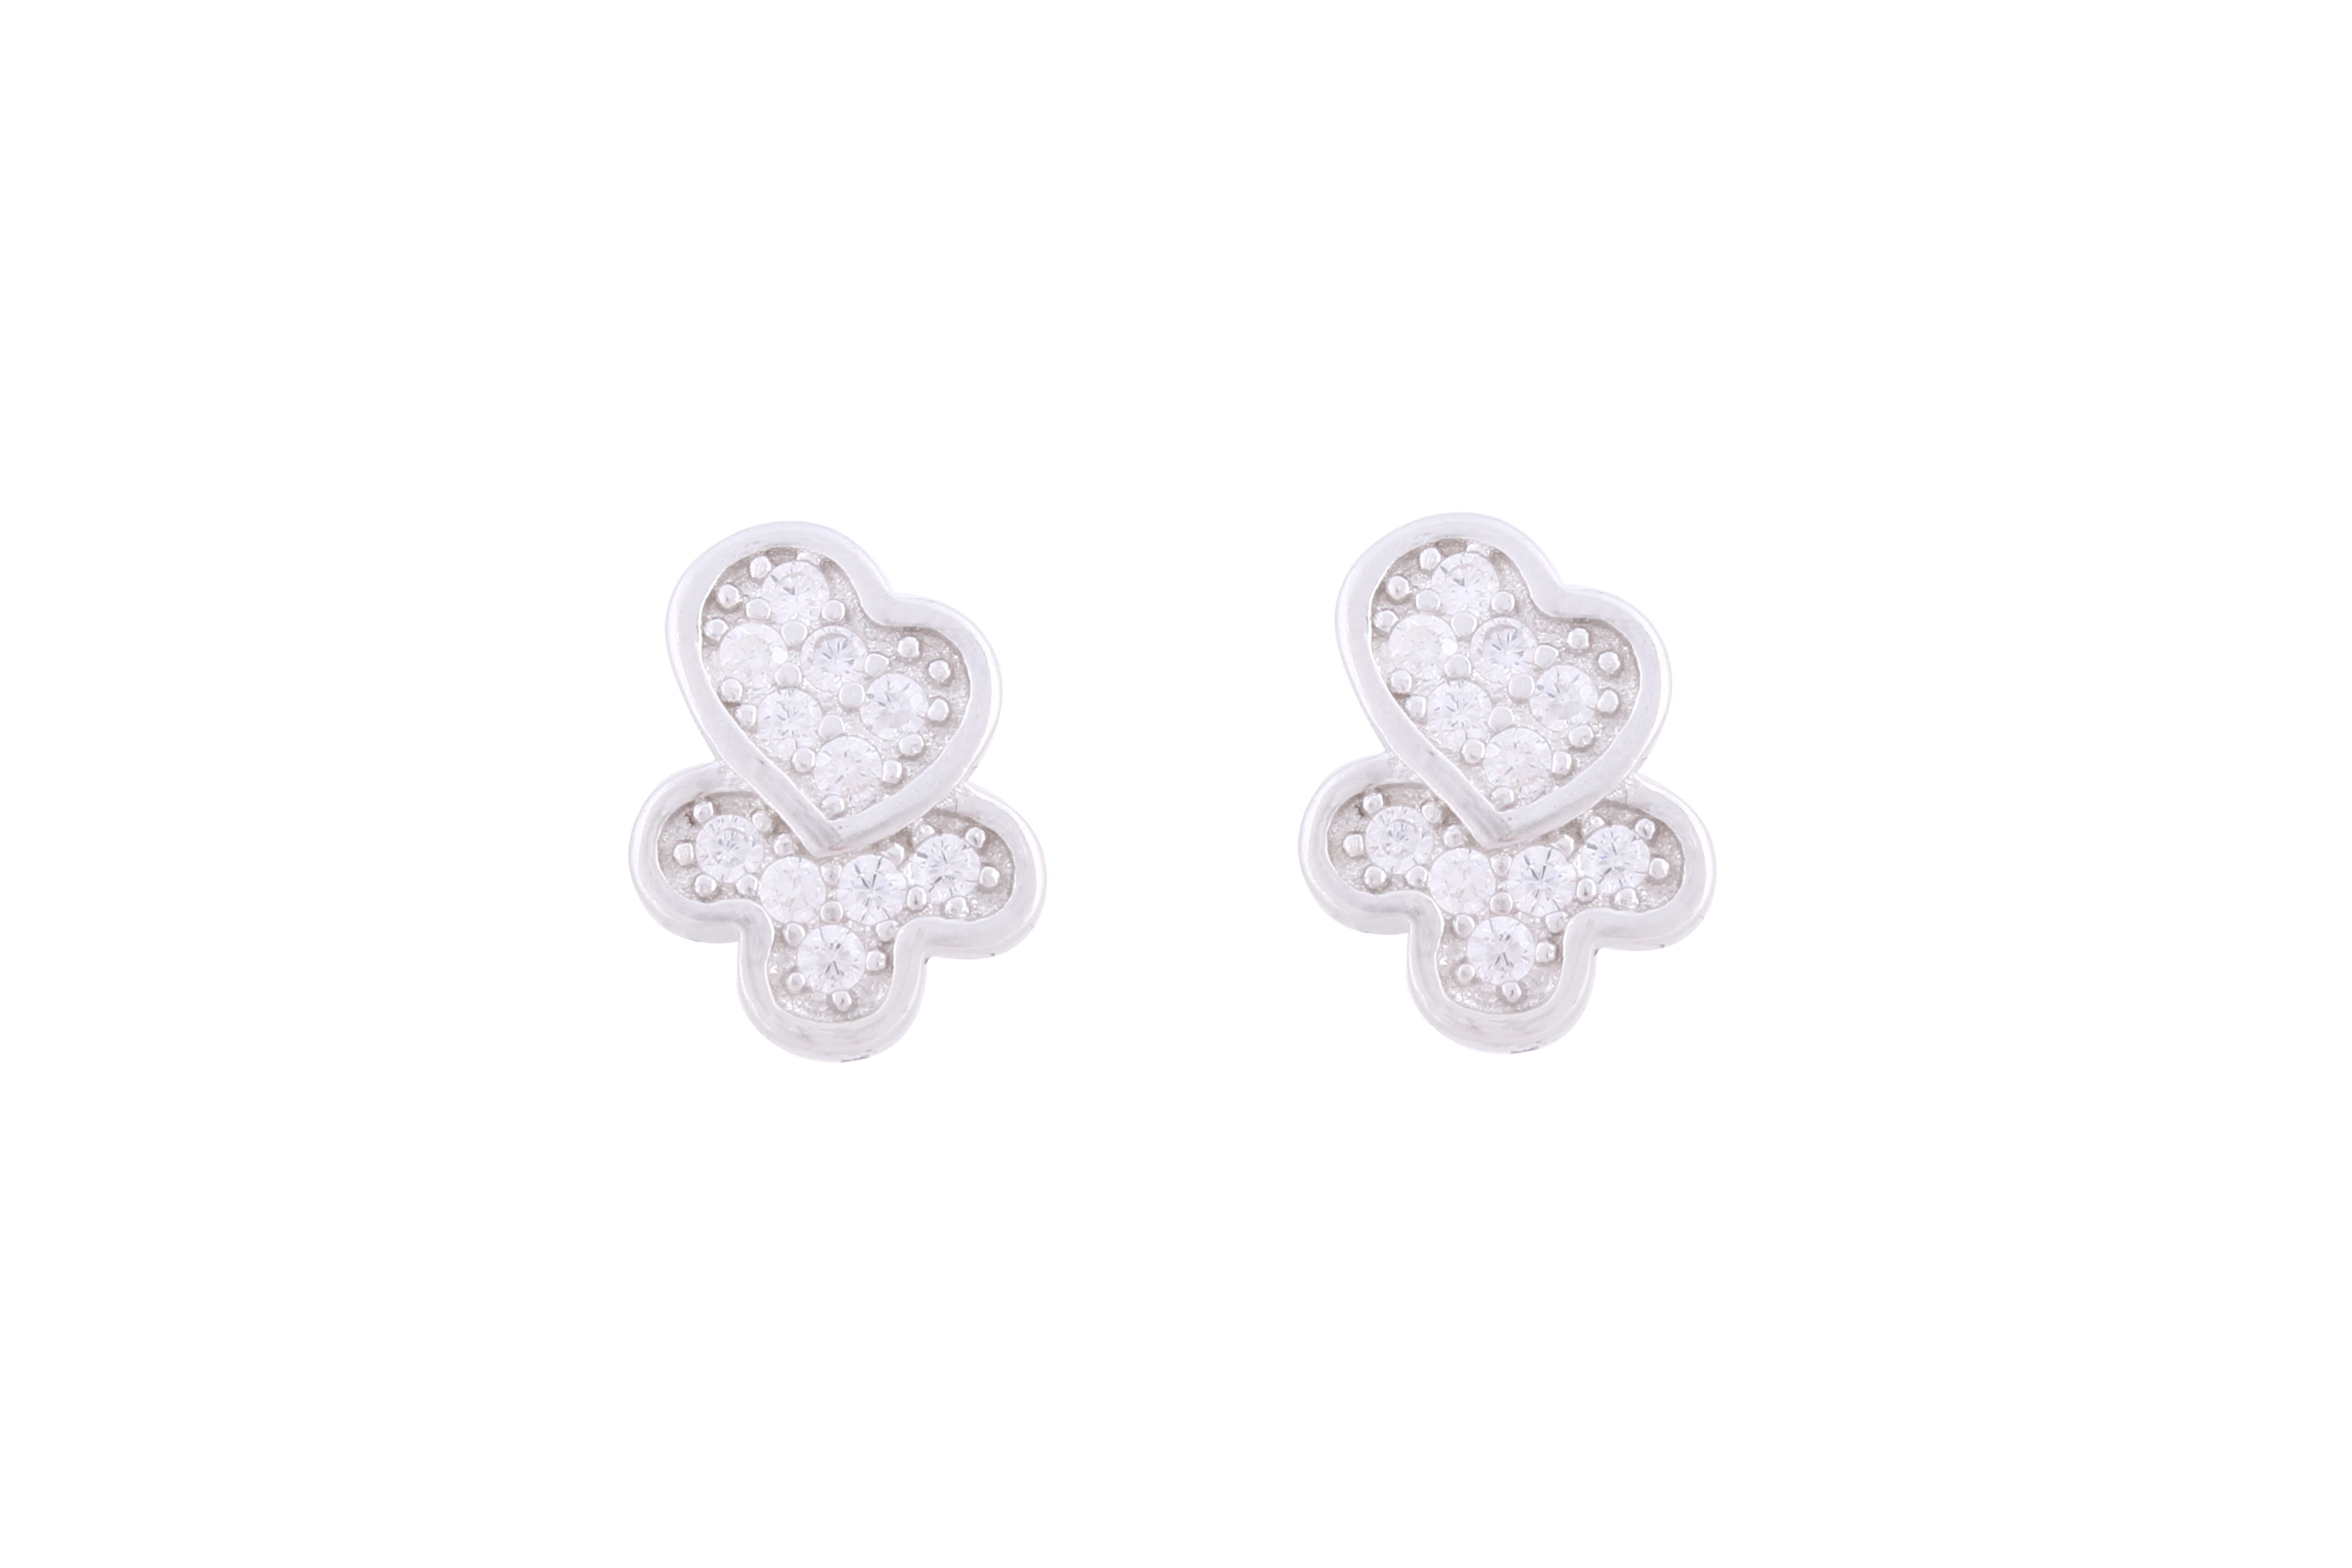 Asfour Crystal Stud Earring With heart & Flower  Design in 925 Sterling Silver ER0381